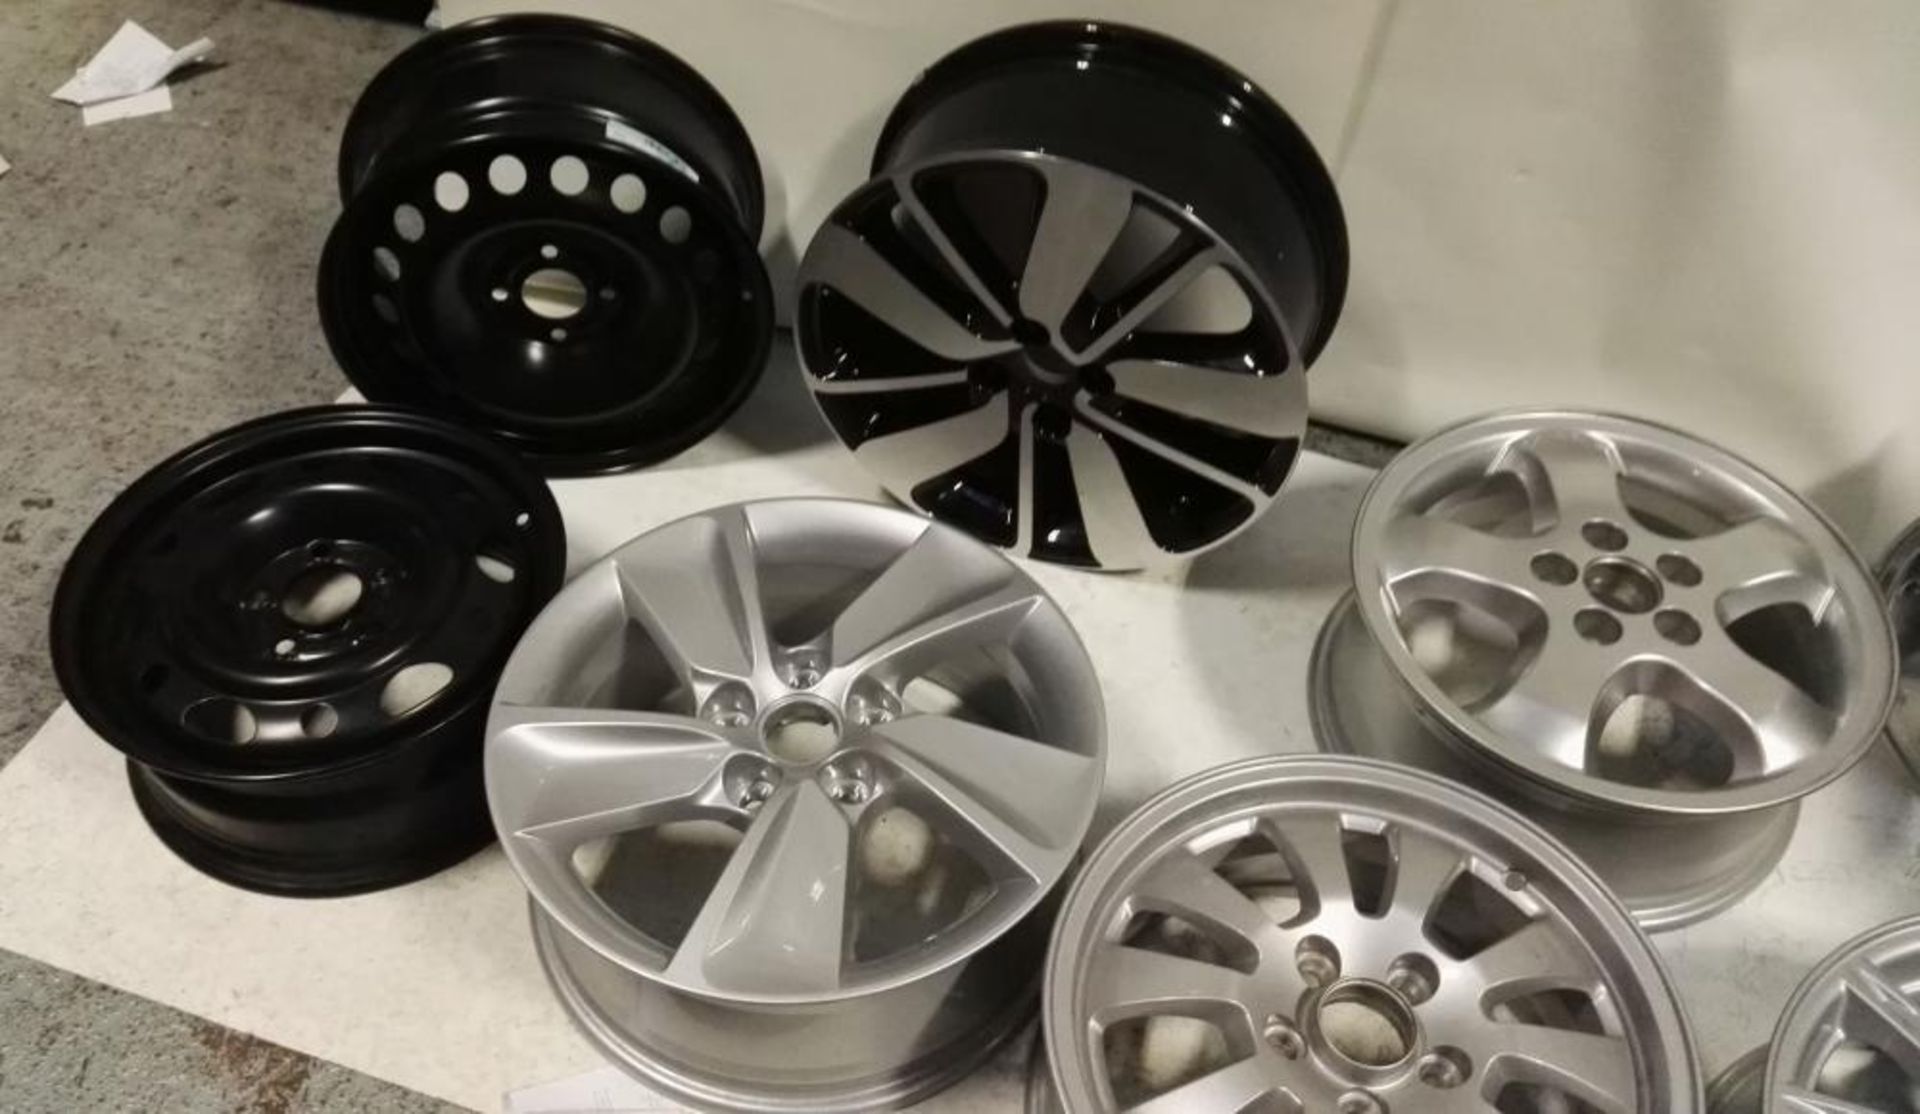 8 x Assorted Alloy Wheels - 15" to 17" - Saab, Opel, Vauxhall, Renault, BBS - CL084 - Location: Altr - Image 5 of 9